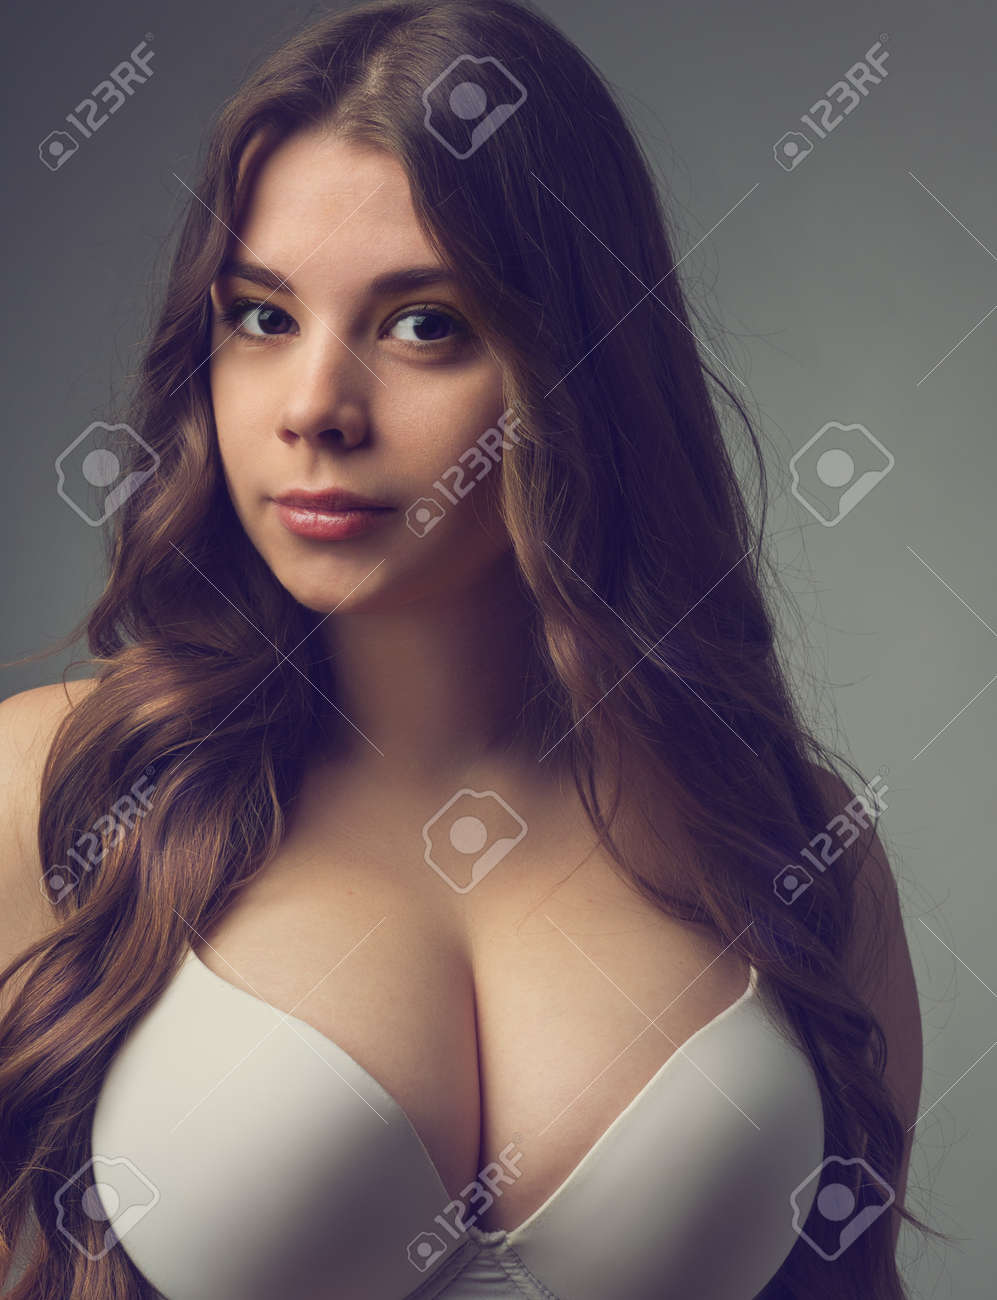 Best of Pics of young women with big tits